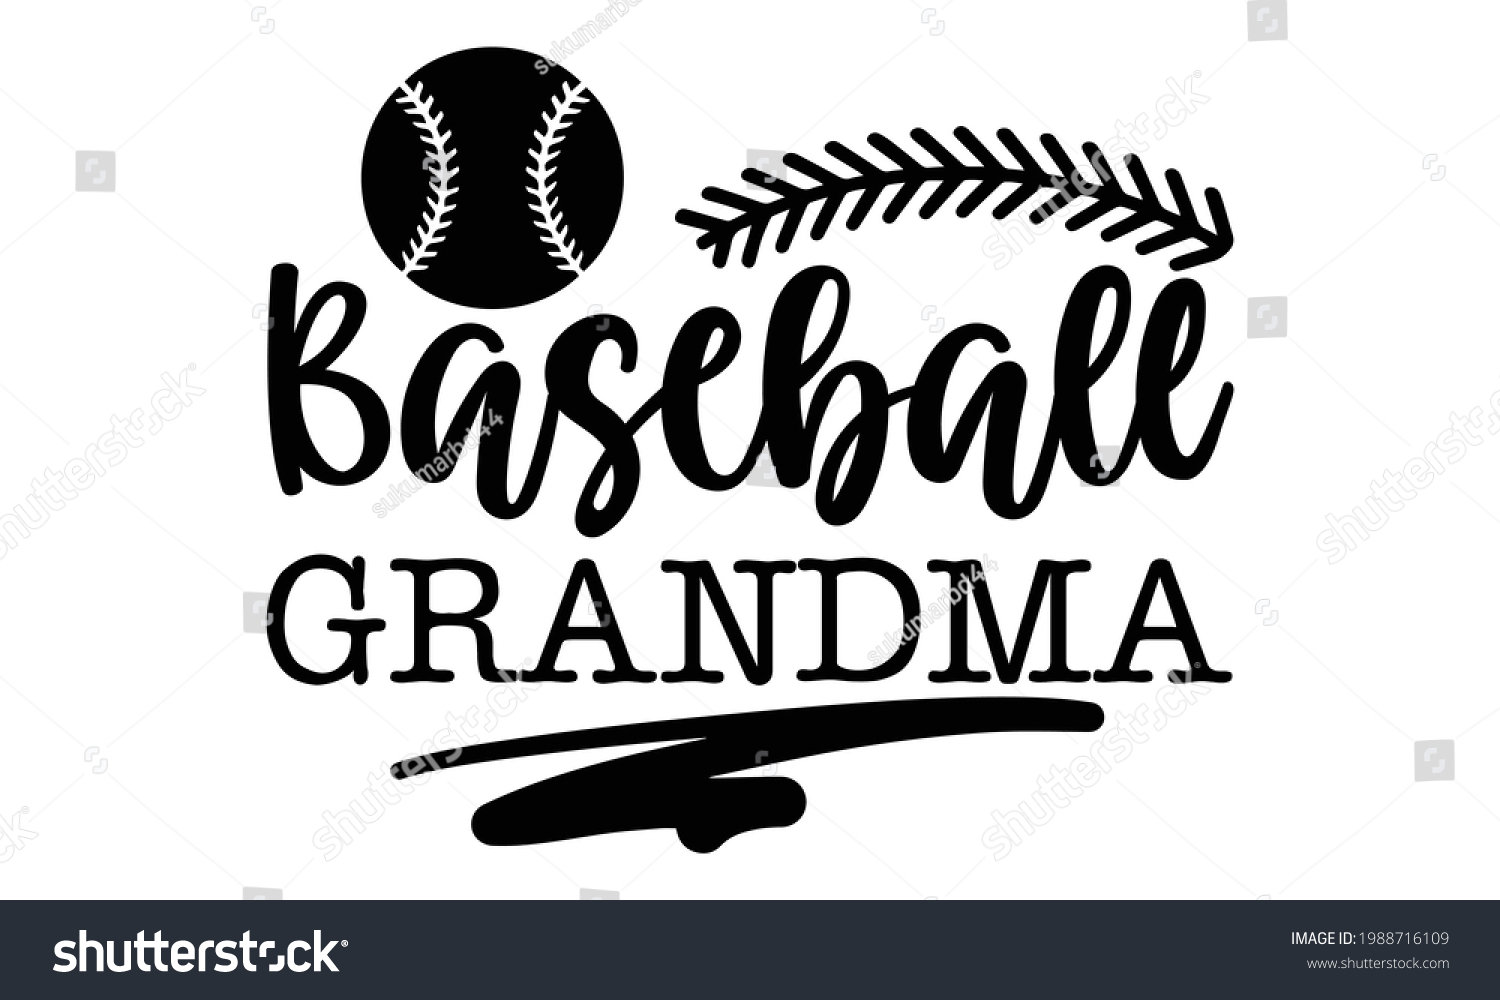 SVG of Baseball Grandma - Sports t shirts design, Hand drawn lettering phrase, Calligraphy t shirt design, Isolated on white background, svg Files for Cutting Cricut and Silhouette, EPS 10, card, flyer svg